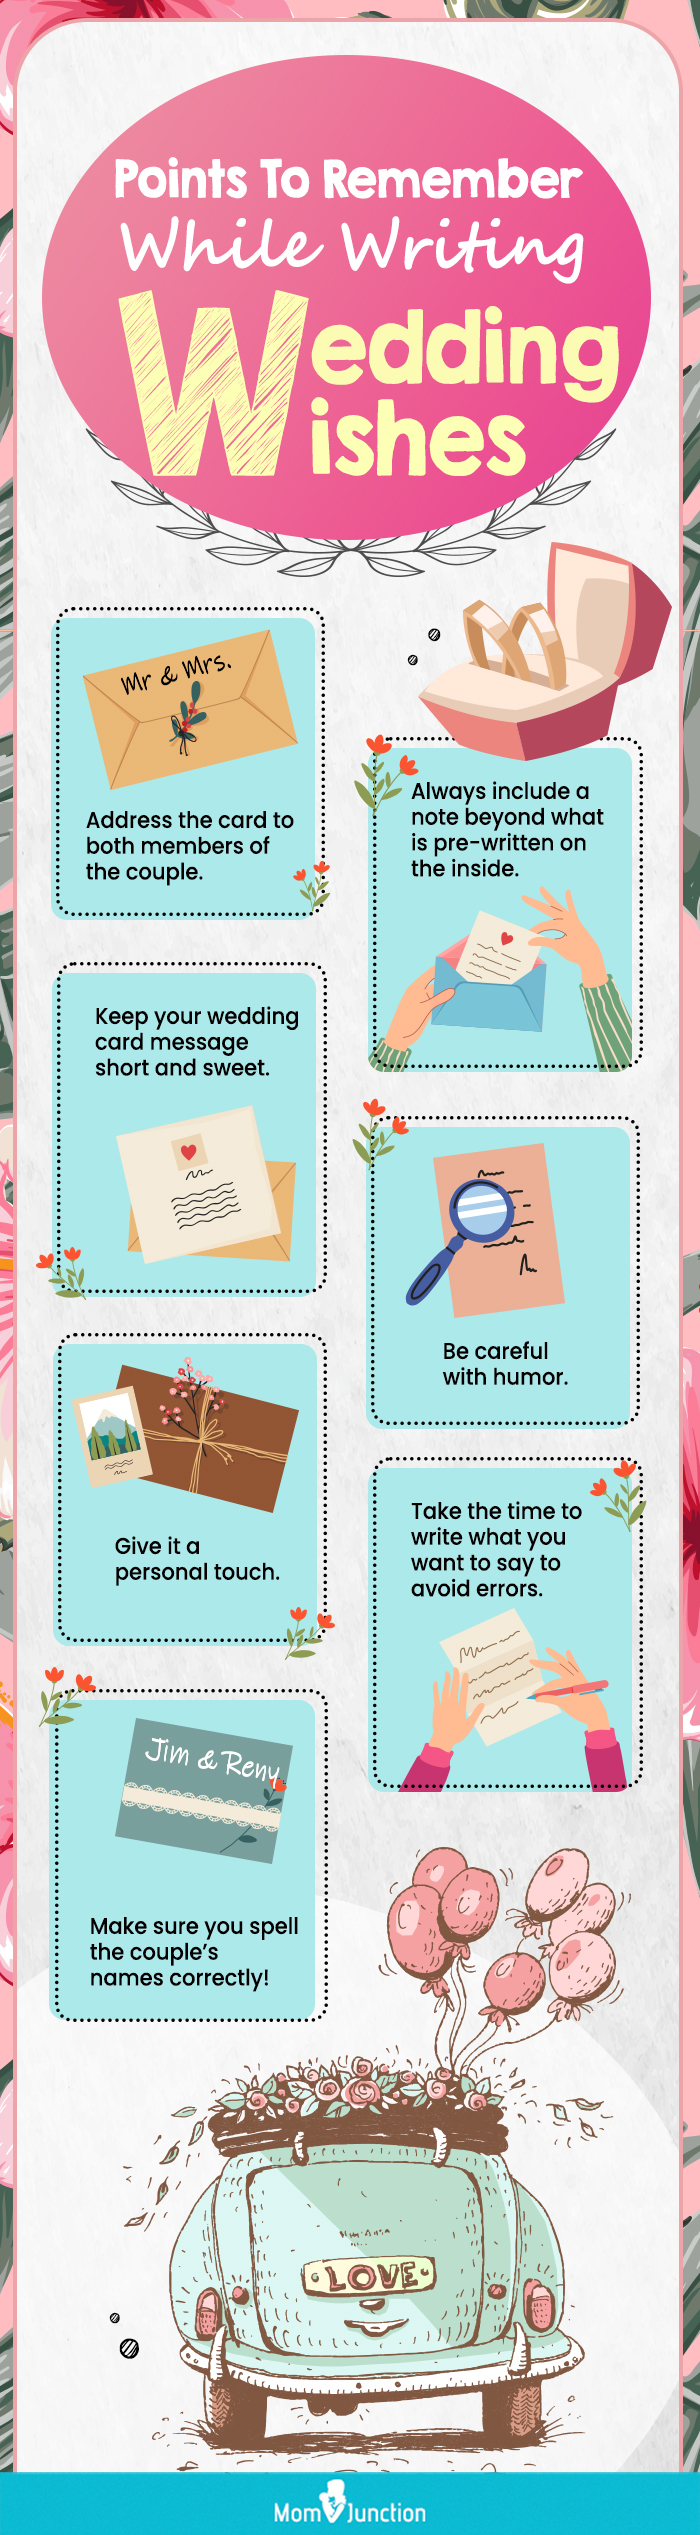 points to remember while writing wedding wishes (infographic)